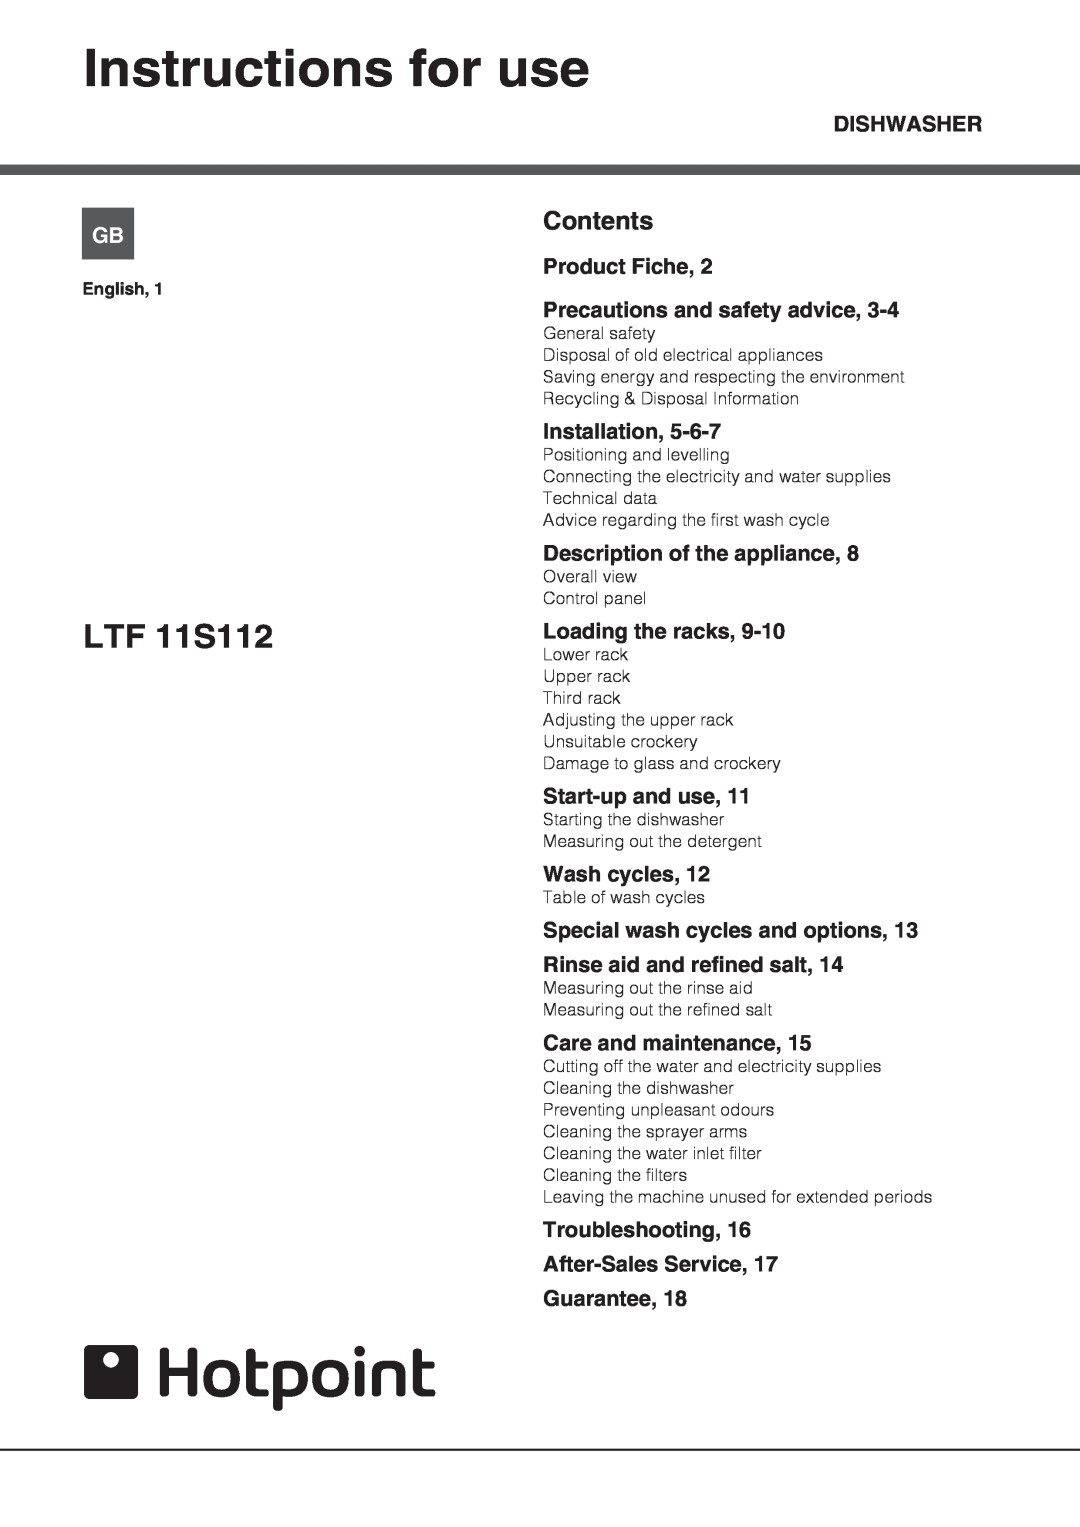 Hotpoint LTF 11S112 manual Instructions for use, Contents 